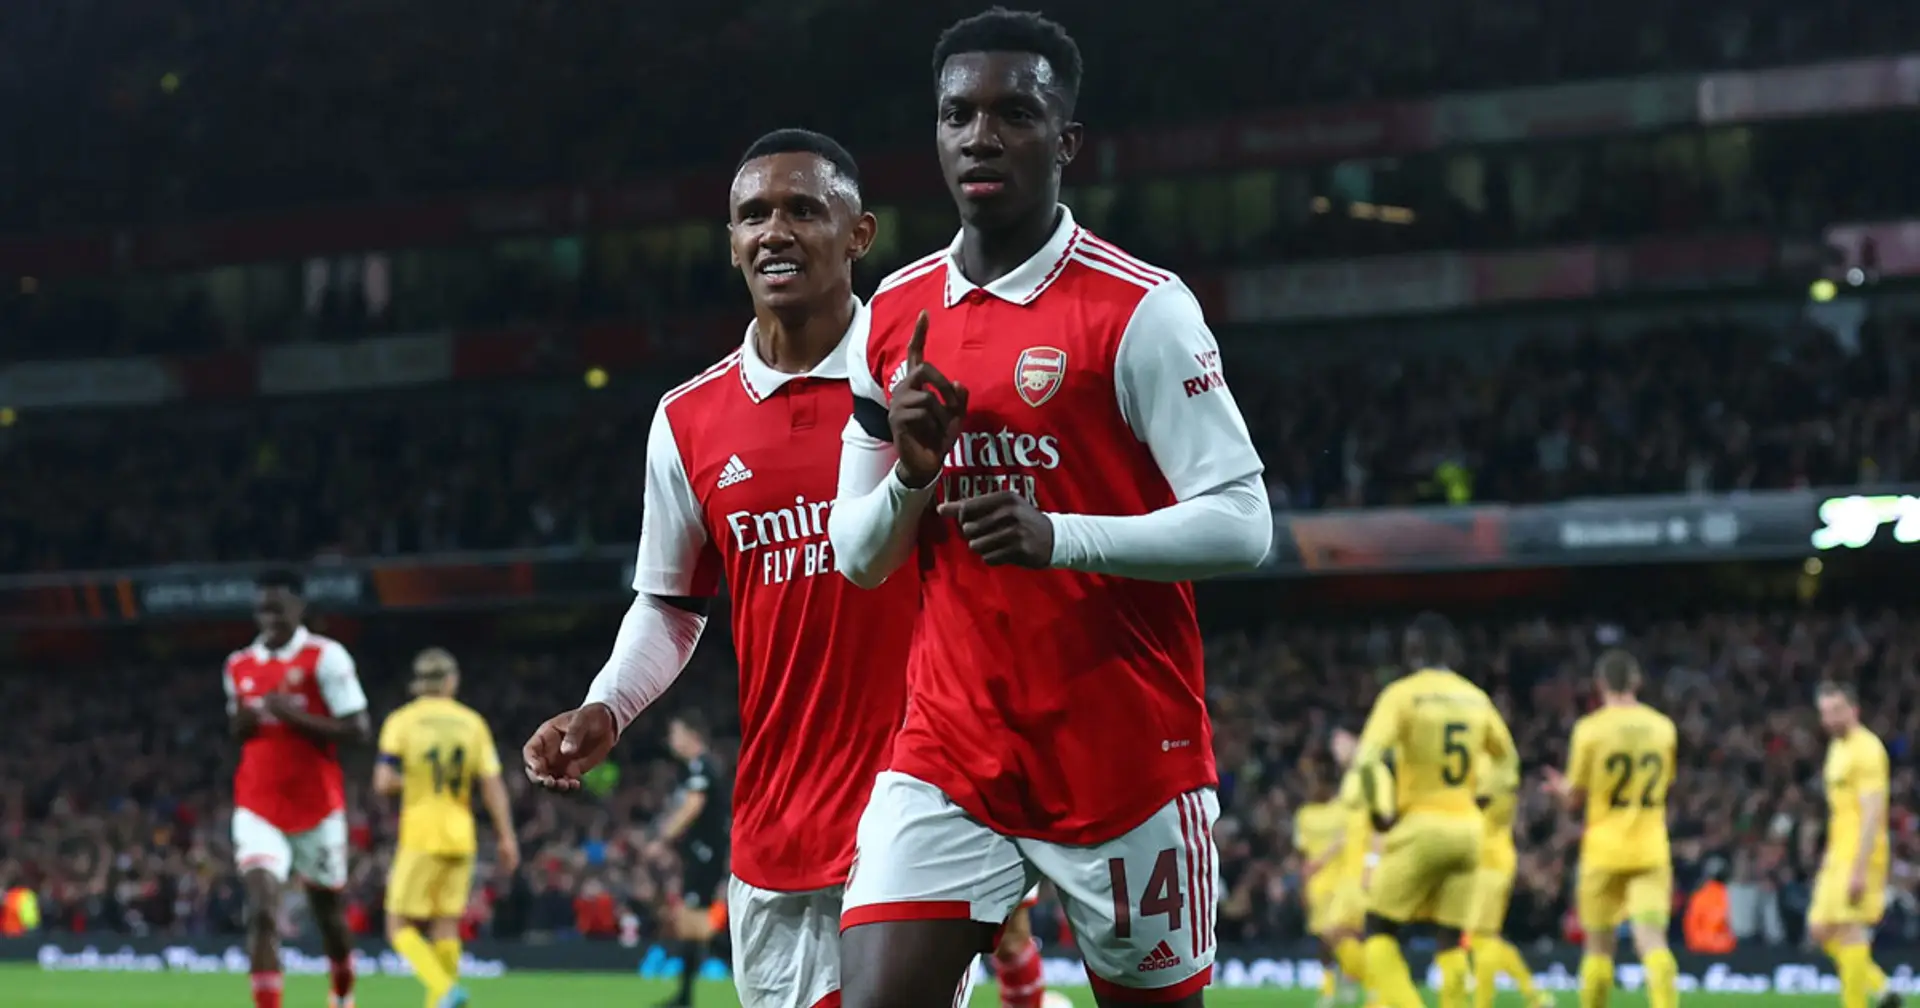 Liverpool up next: Taking a look at Arsenal's next 5 fixtures